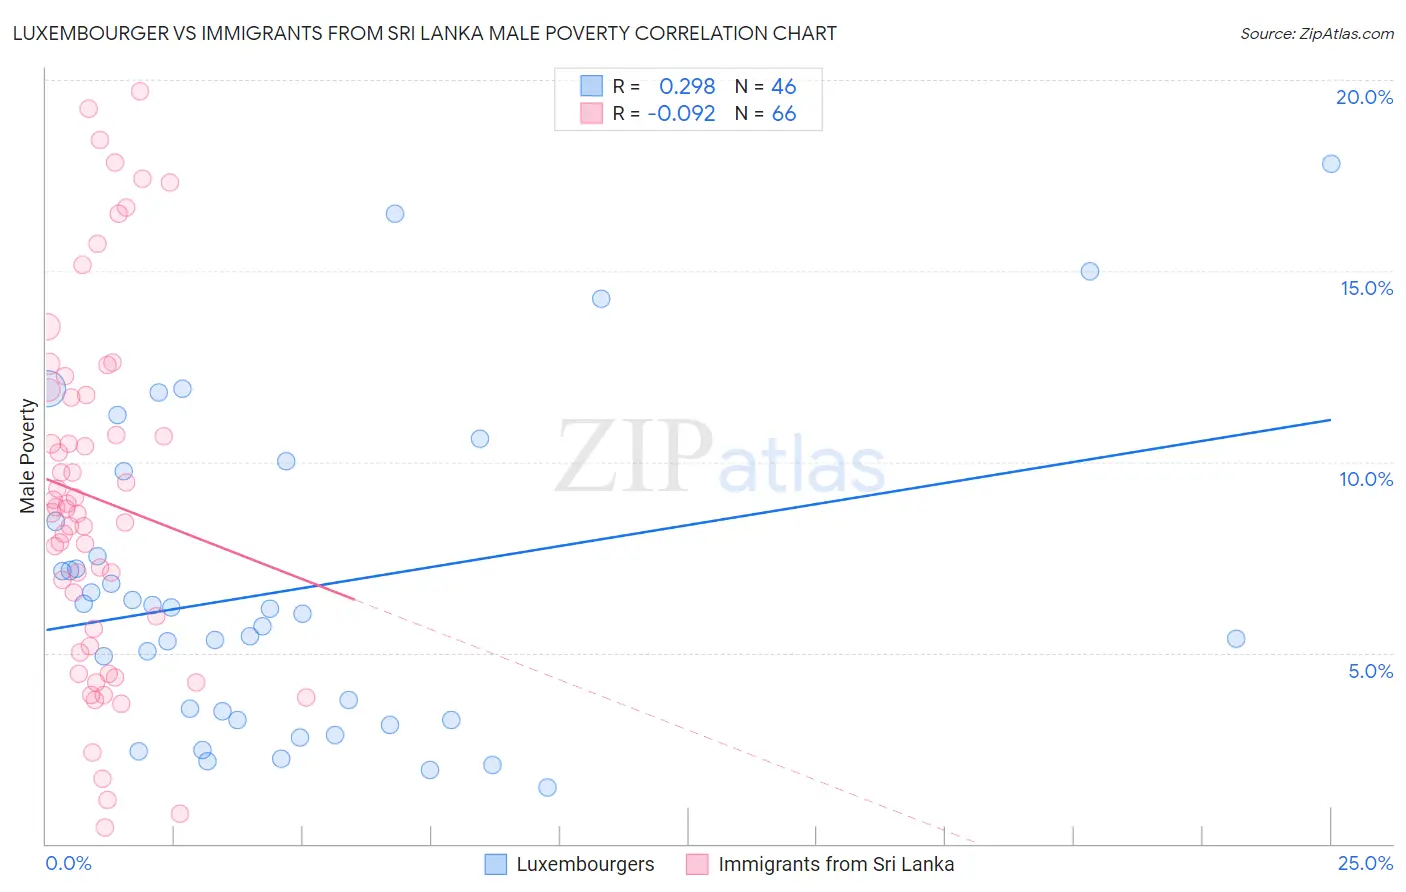 Luxembourger vs Immigrants from Sri Lanka Male Poverty